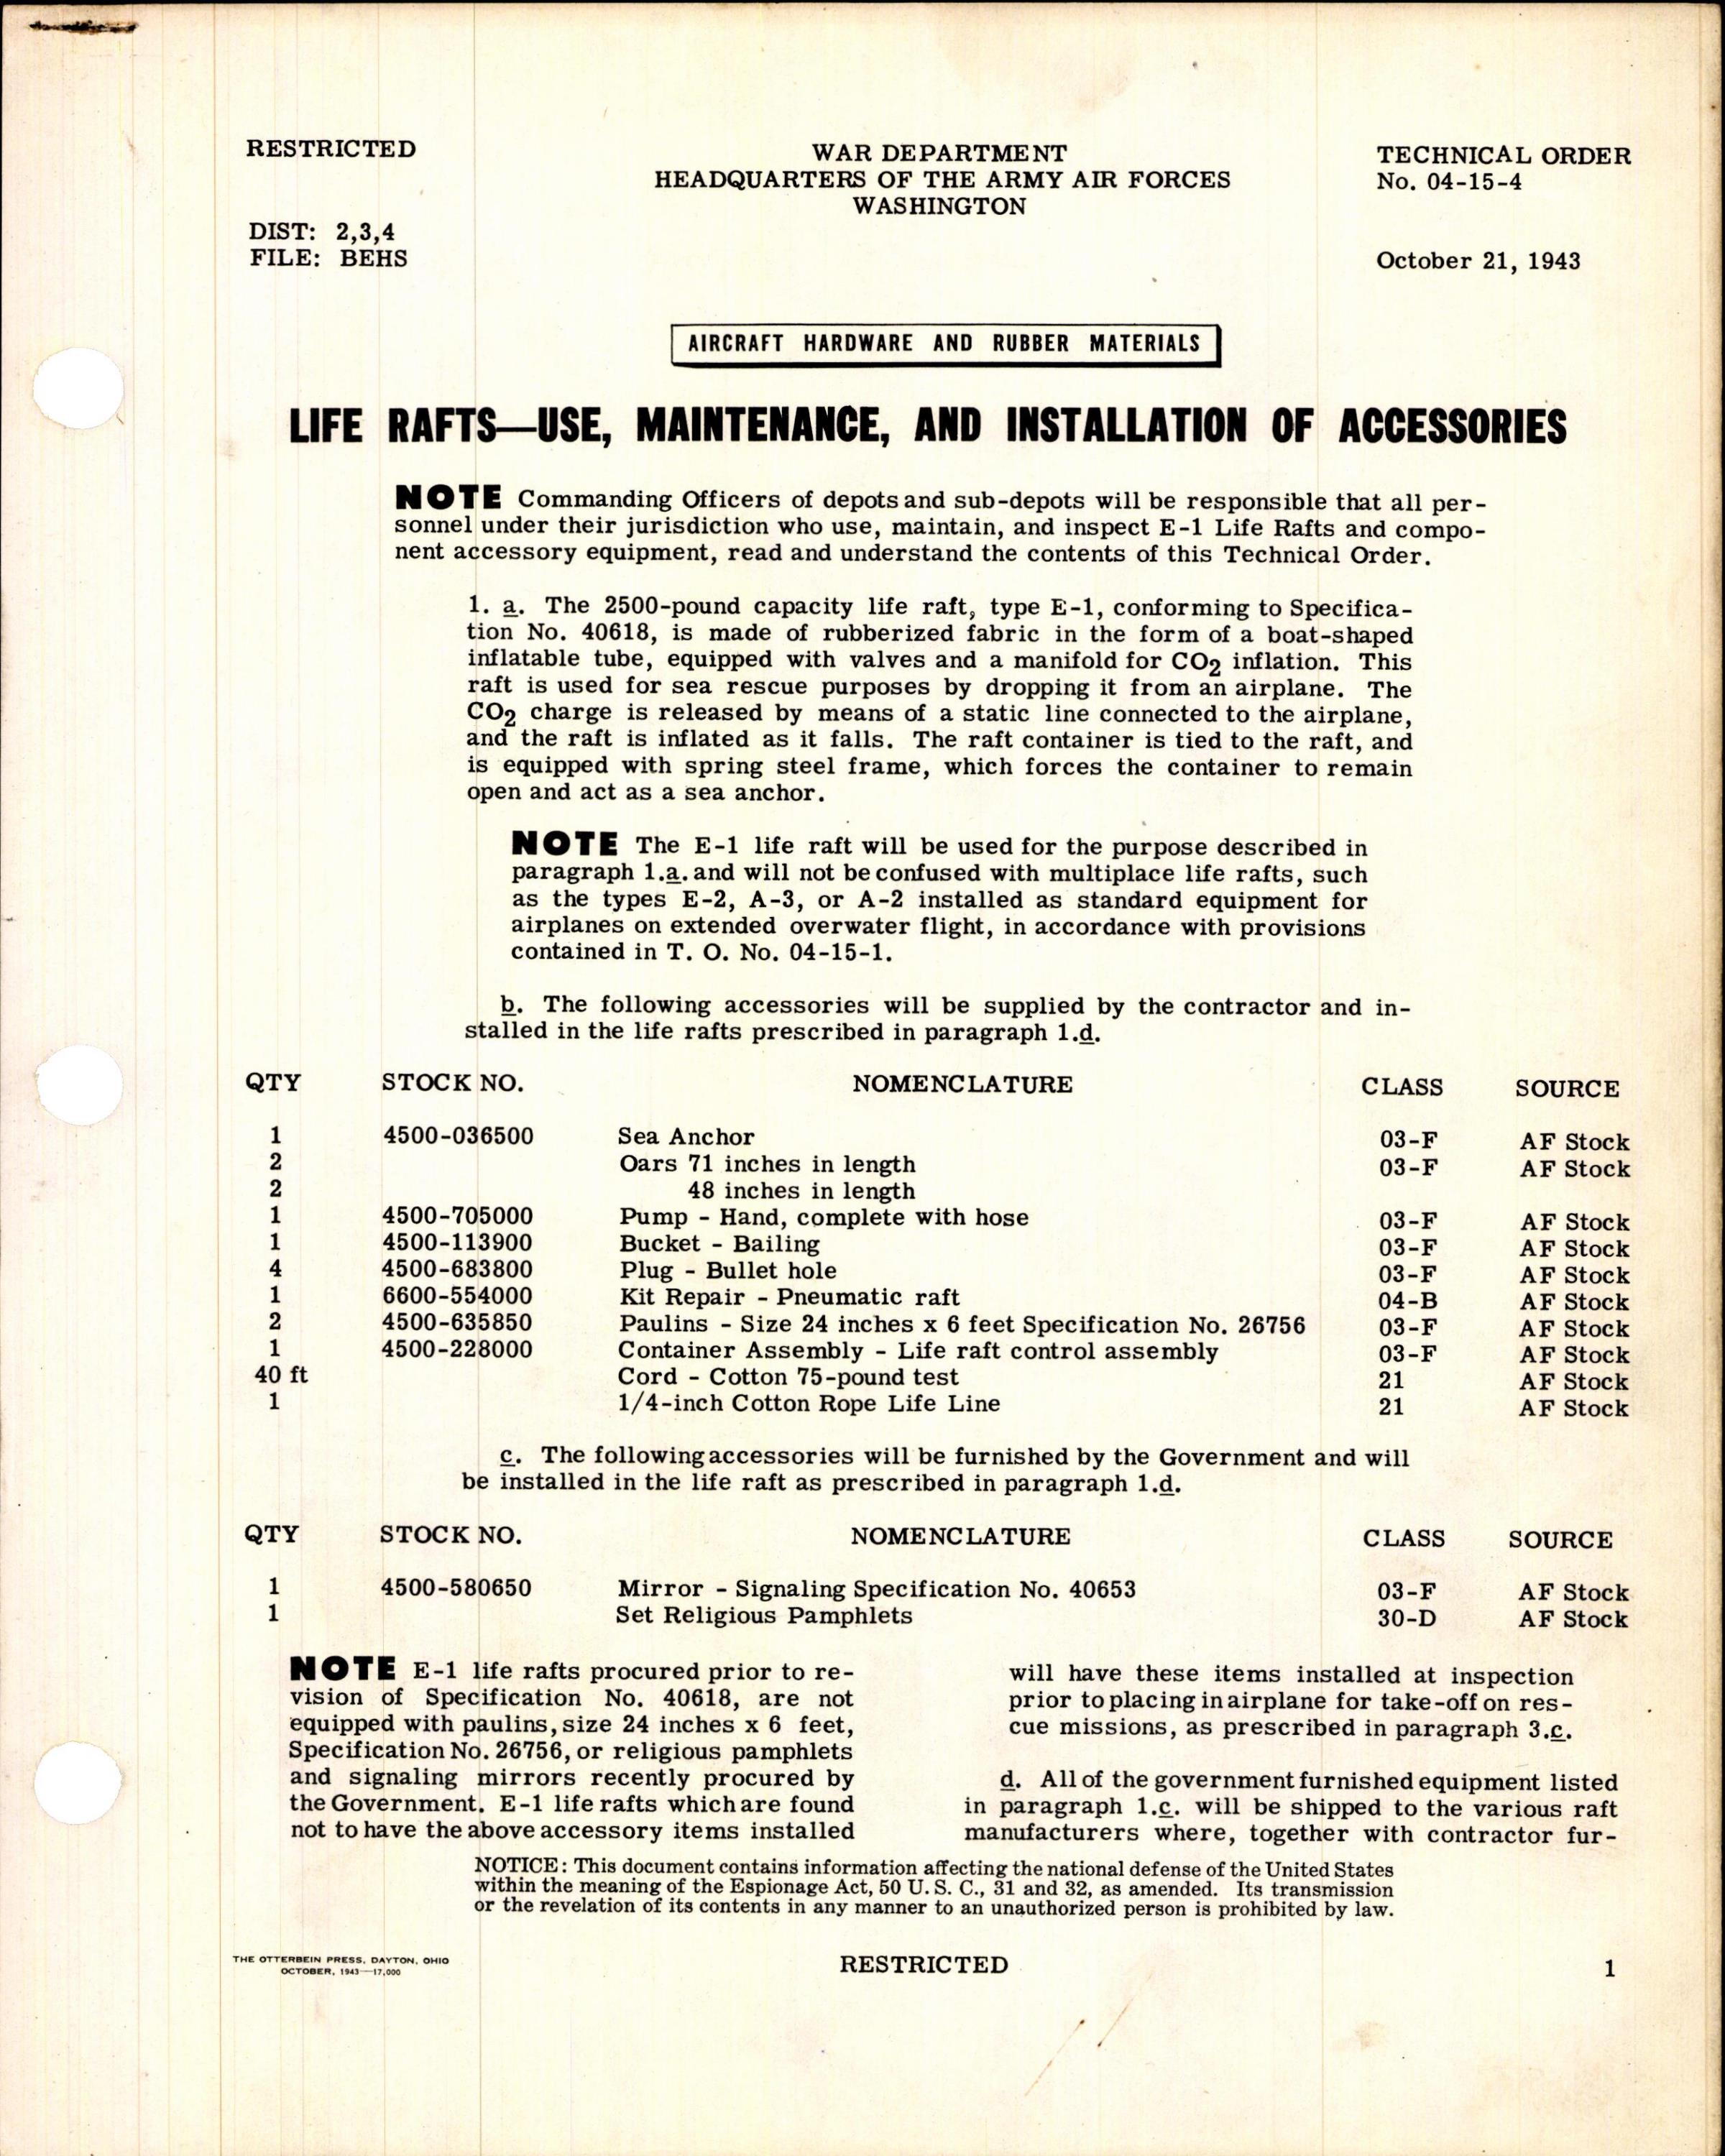 Sample page 1 from AirCorps Library document: Use, Maintenance, and Installation of Life Raft Accessories